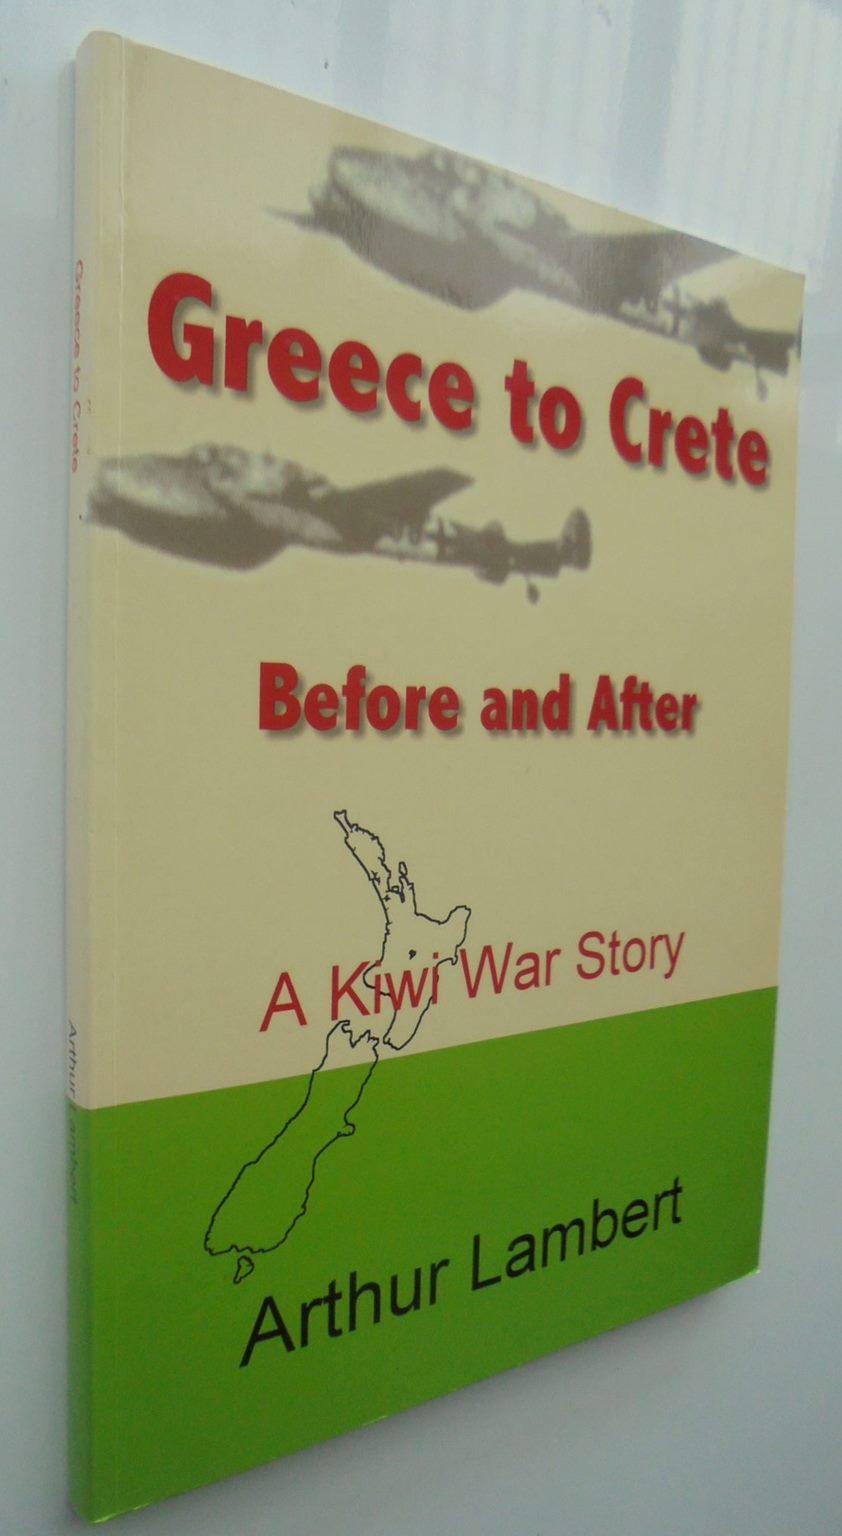 Greece to Crete, Before and After: A Kiwi War Story - by Arthur Lambert. [Signed]